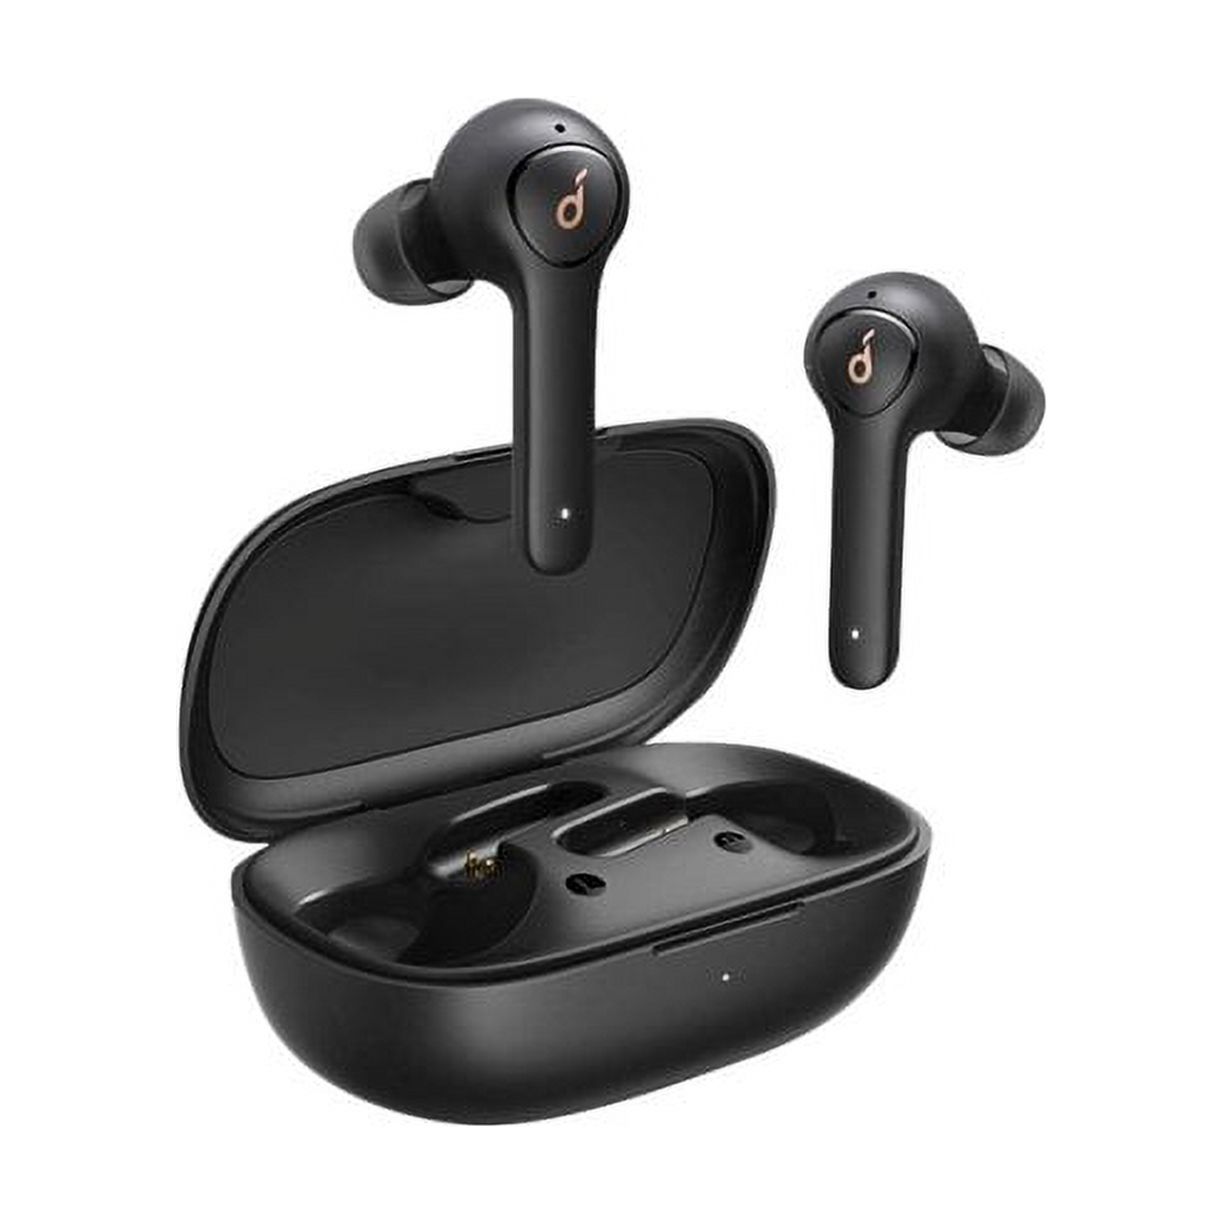 Soundcore Earbuds True Wireless Headphones with Charging Case, Black, A3919 - image 2 of 3